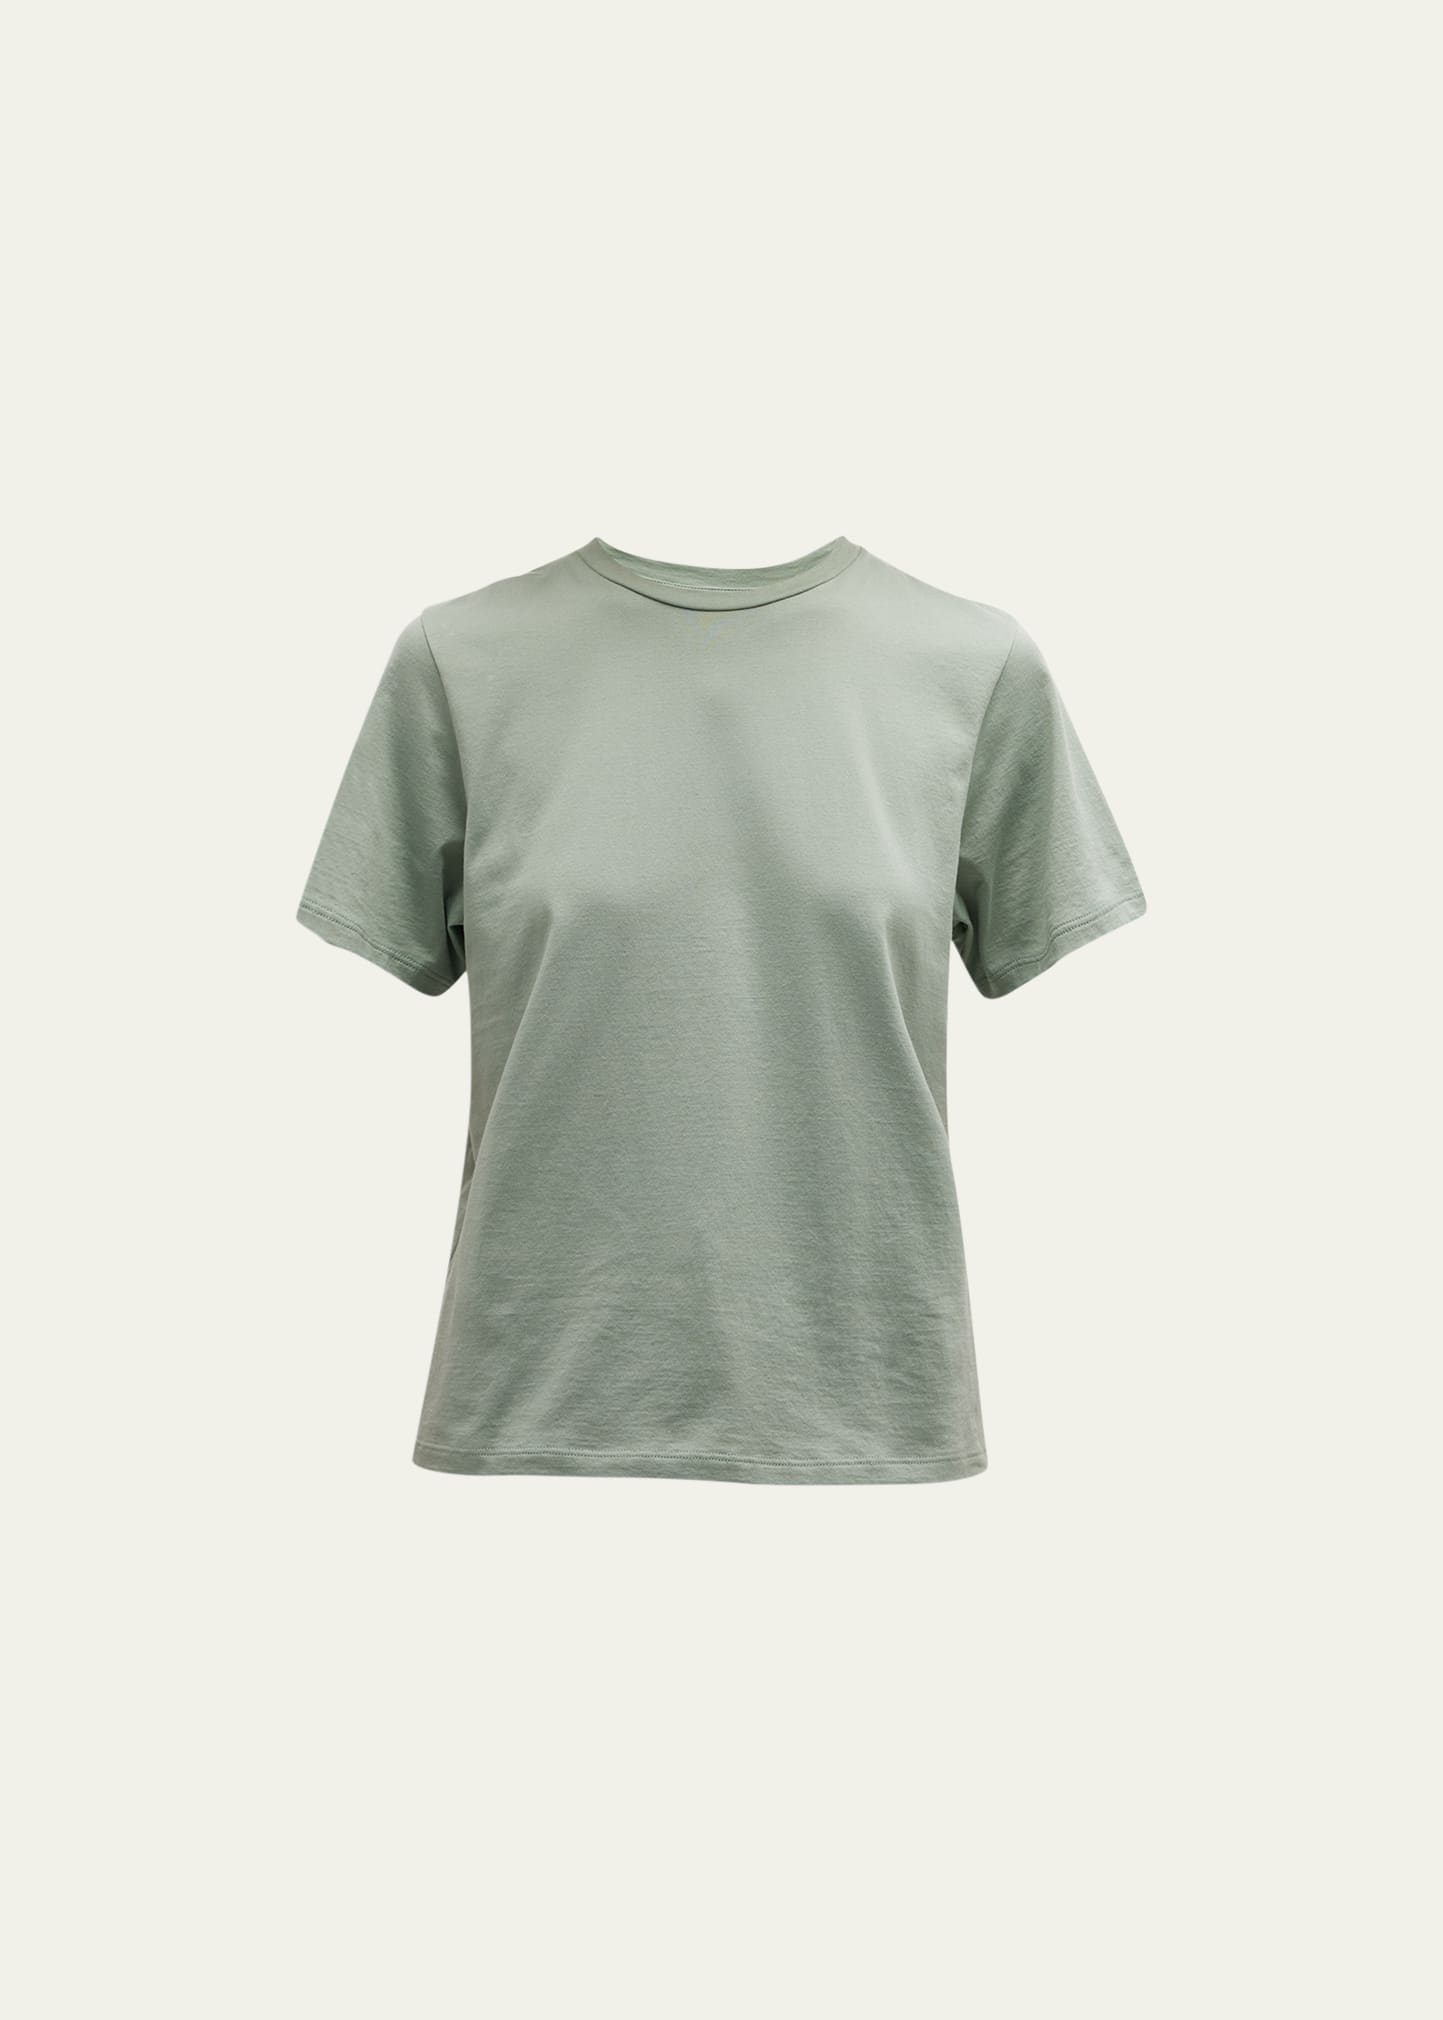 Theory Apex Tiny Tee In Silver Mint